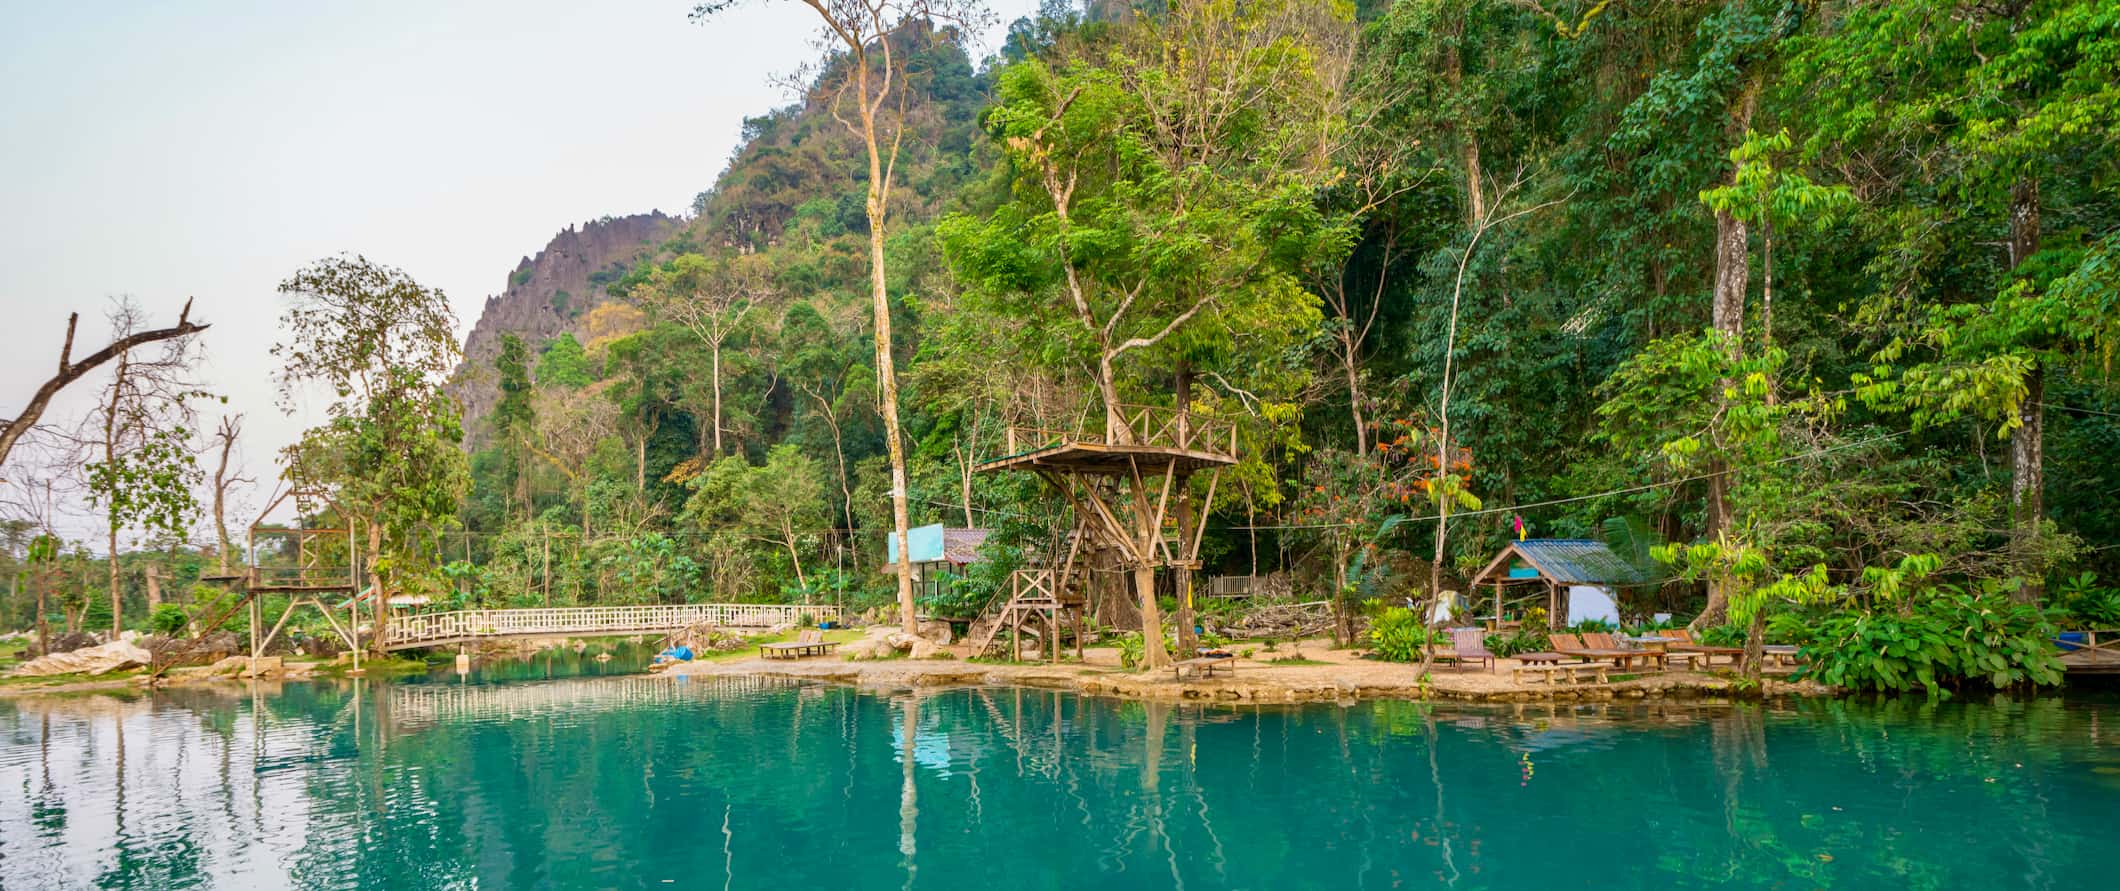 A swimming hole in the river near Vang Vieng, Laos